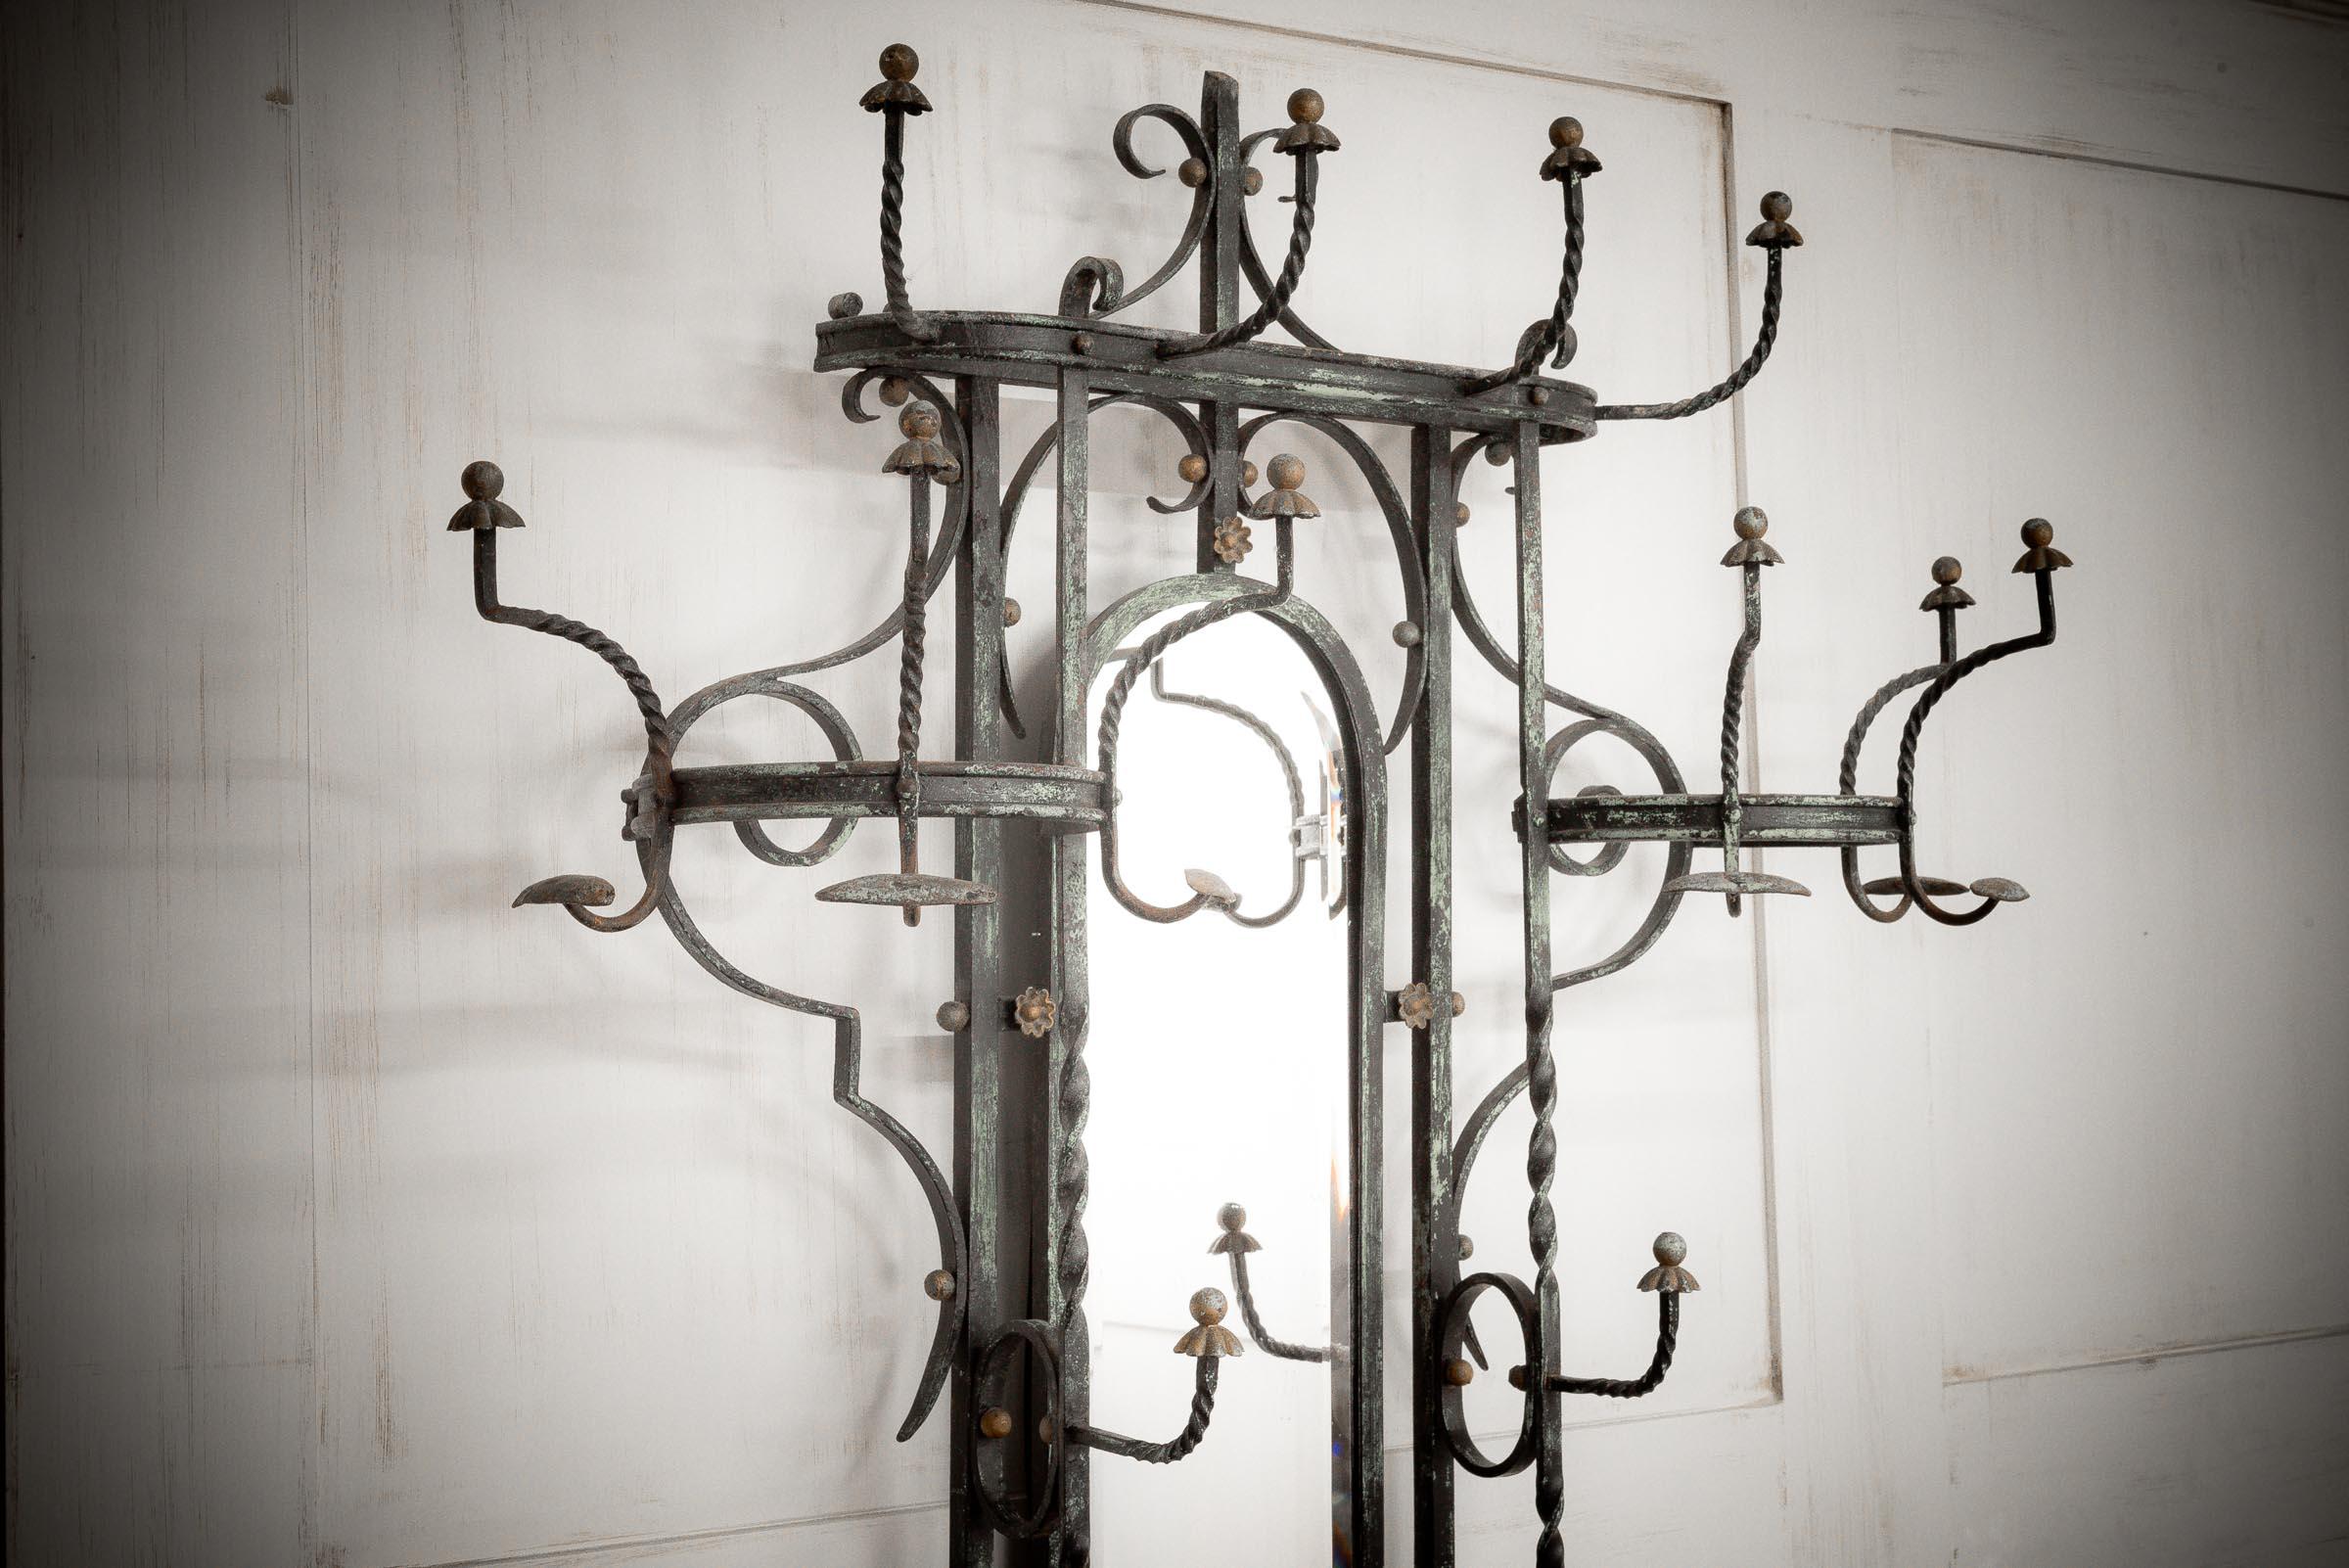 French wrought iron hall stand with coat and hat hooks, a central mirror with a small drawer for keys and watches.